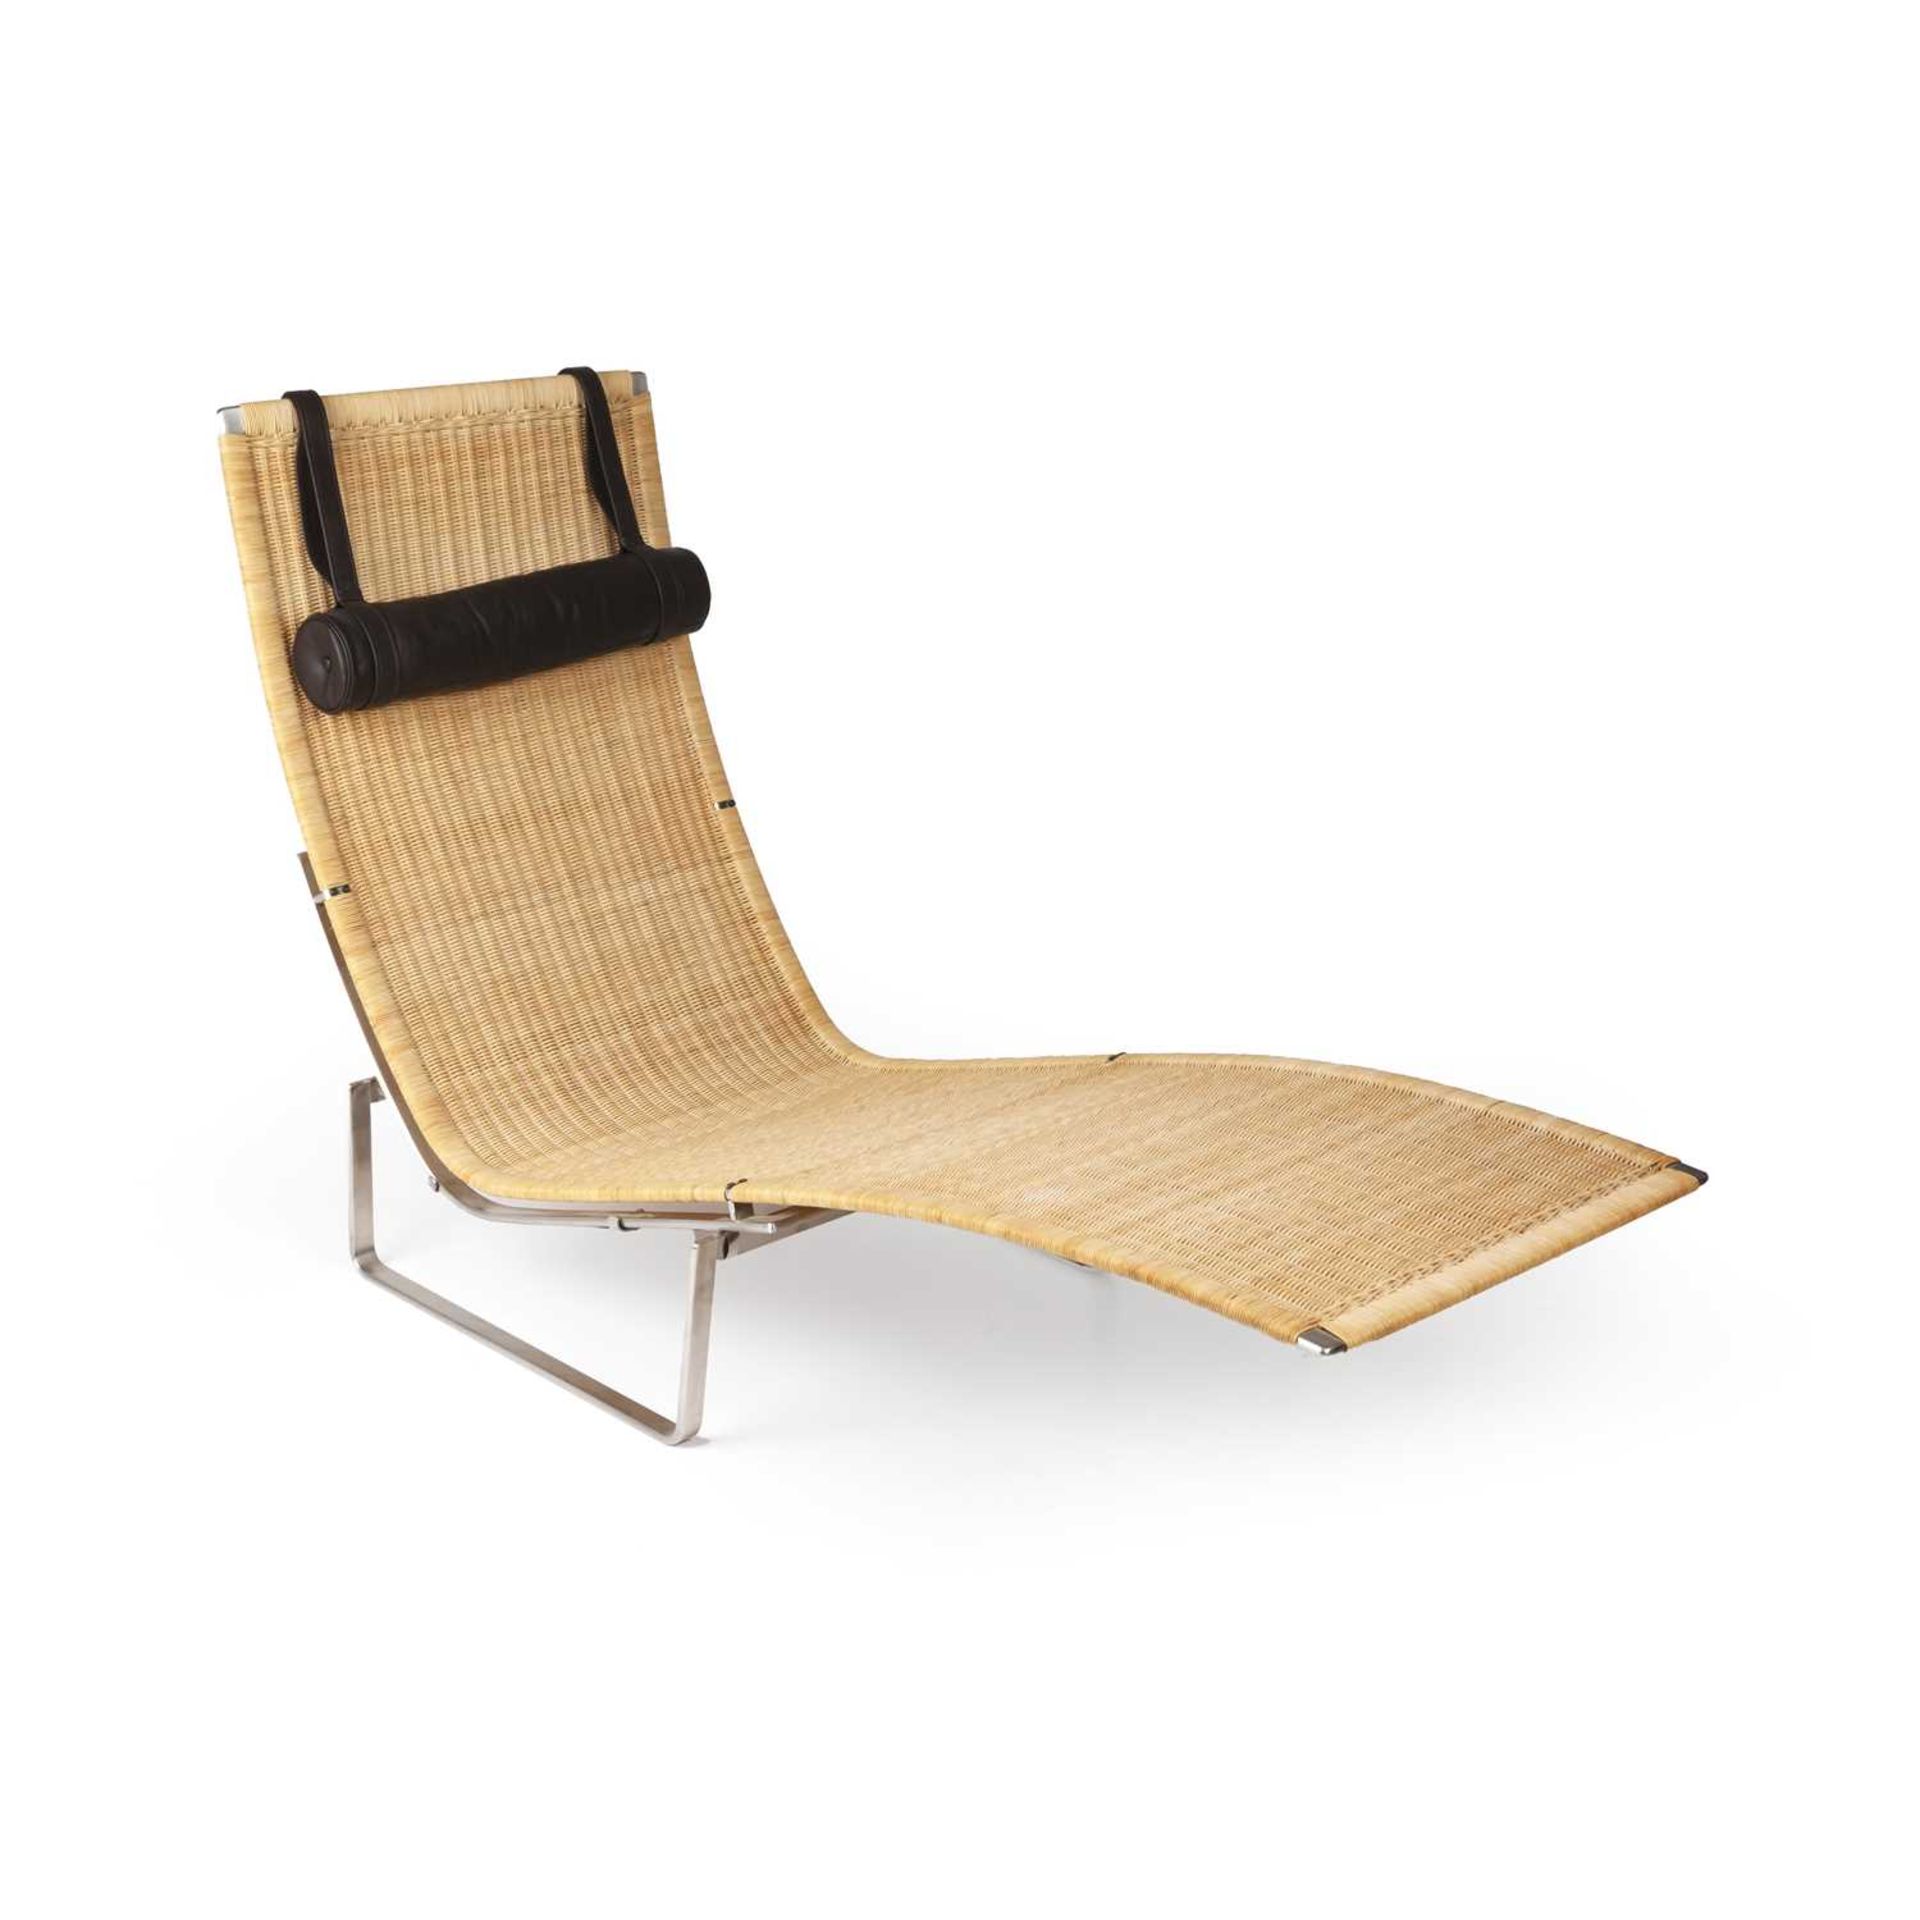 Poul Kjaerholm (1929-1980) for Fritz Hansen PK24 lounge chair the wicker seat with metal frame and - Image 2 of 4